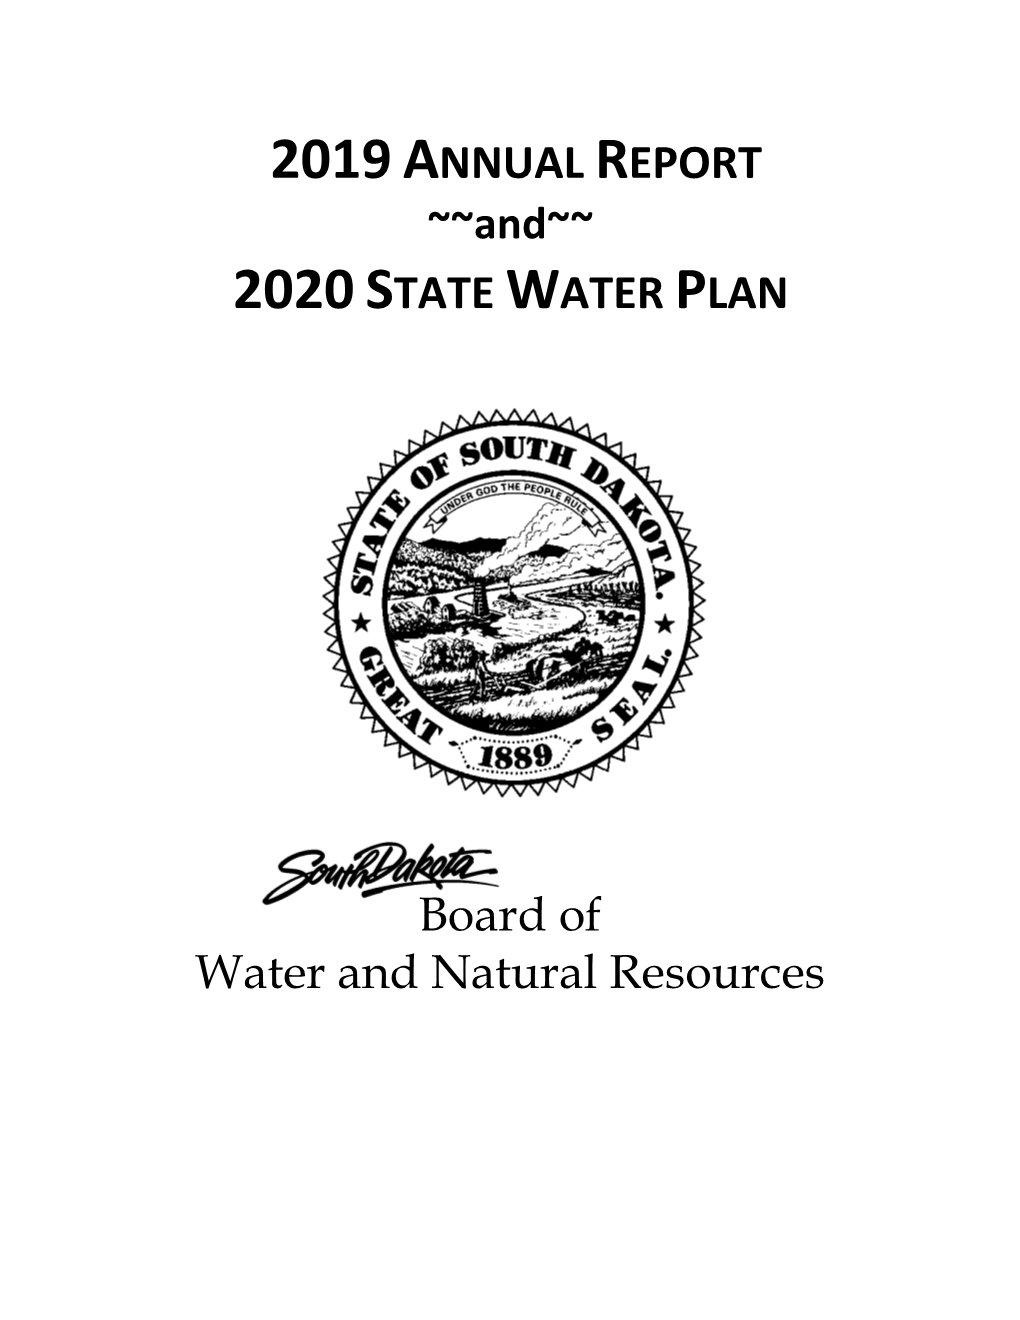 2019 Annual Report and 2020 State Water Plan